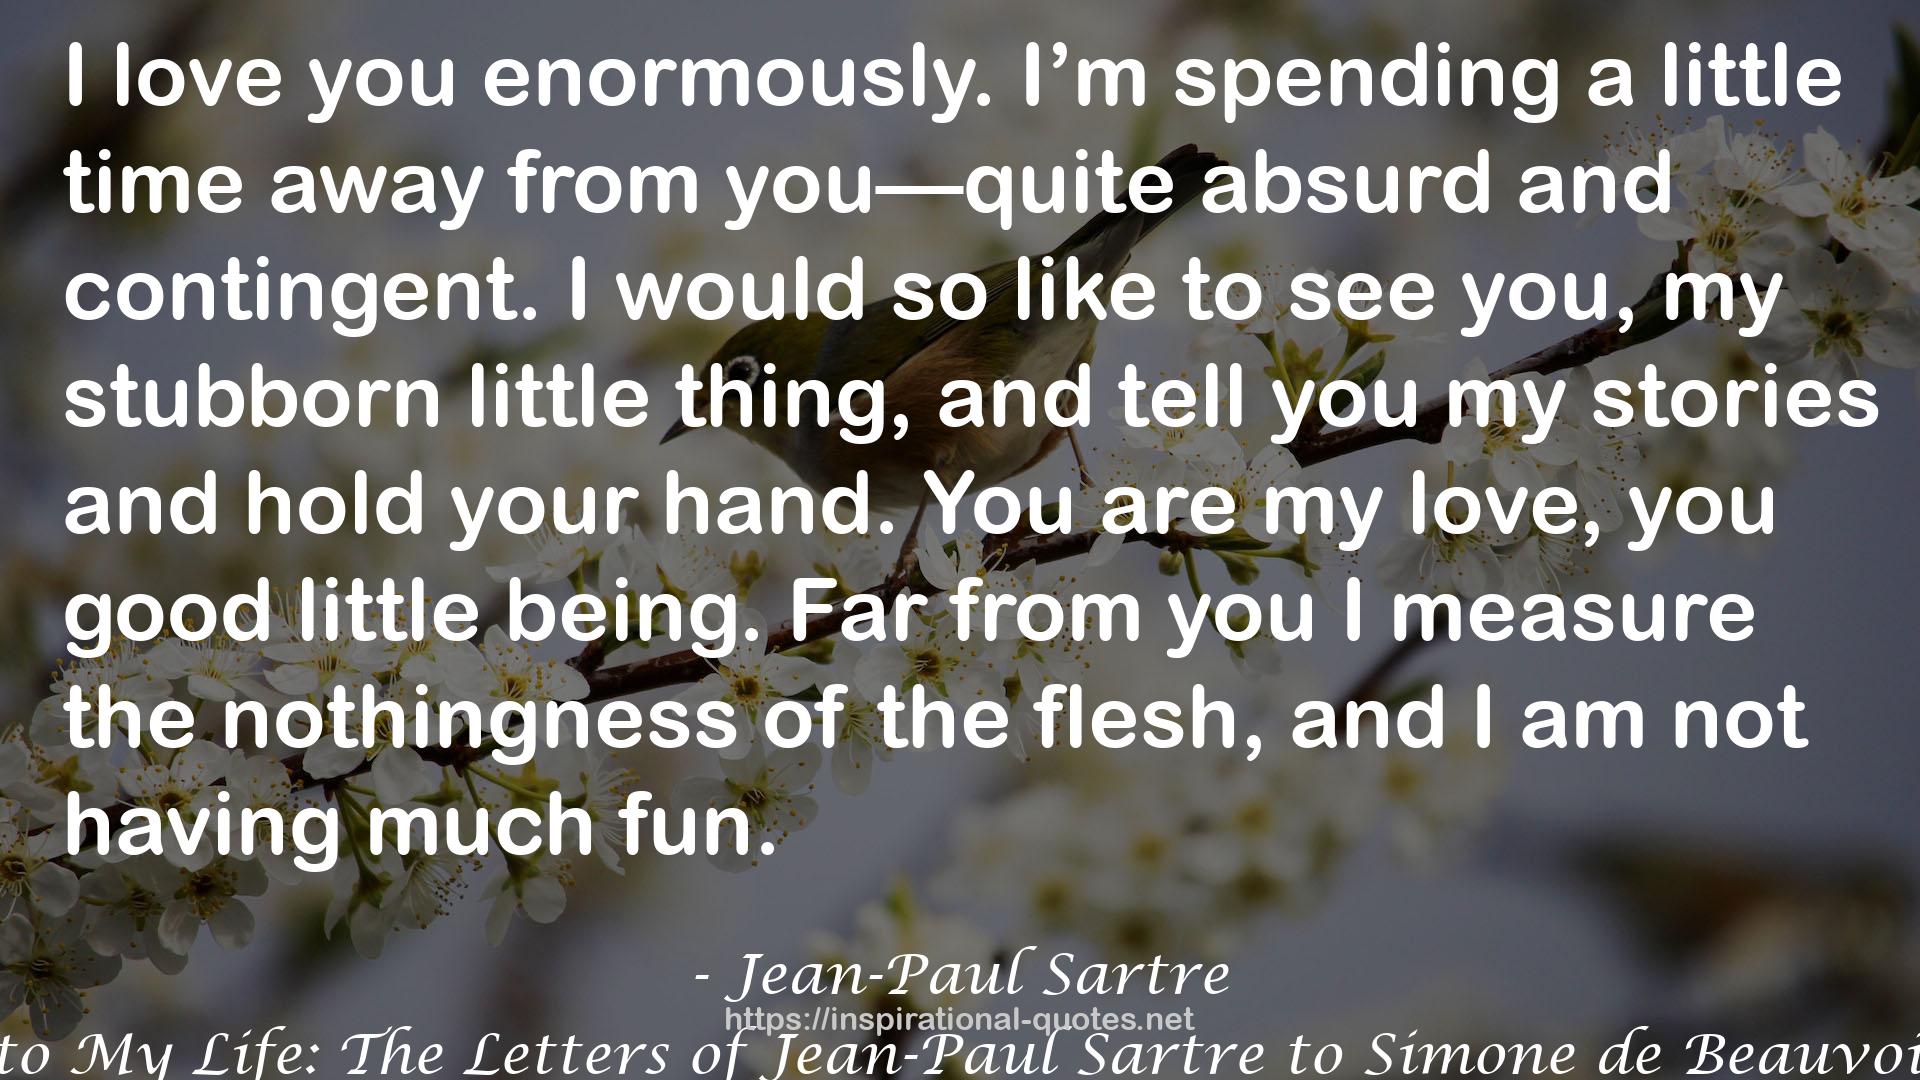 Witness to My Life: The Letters of Jean-Paul Sartre to Simone de Beauvoir 1926-39 QUOTES